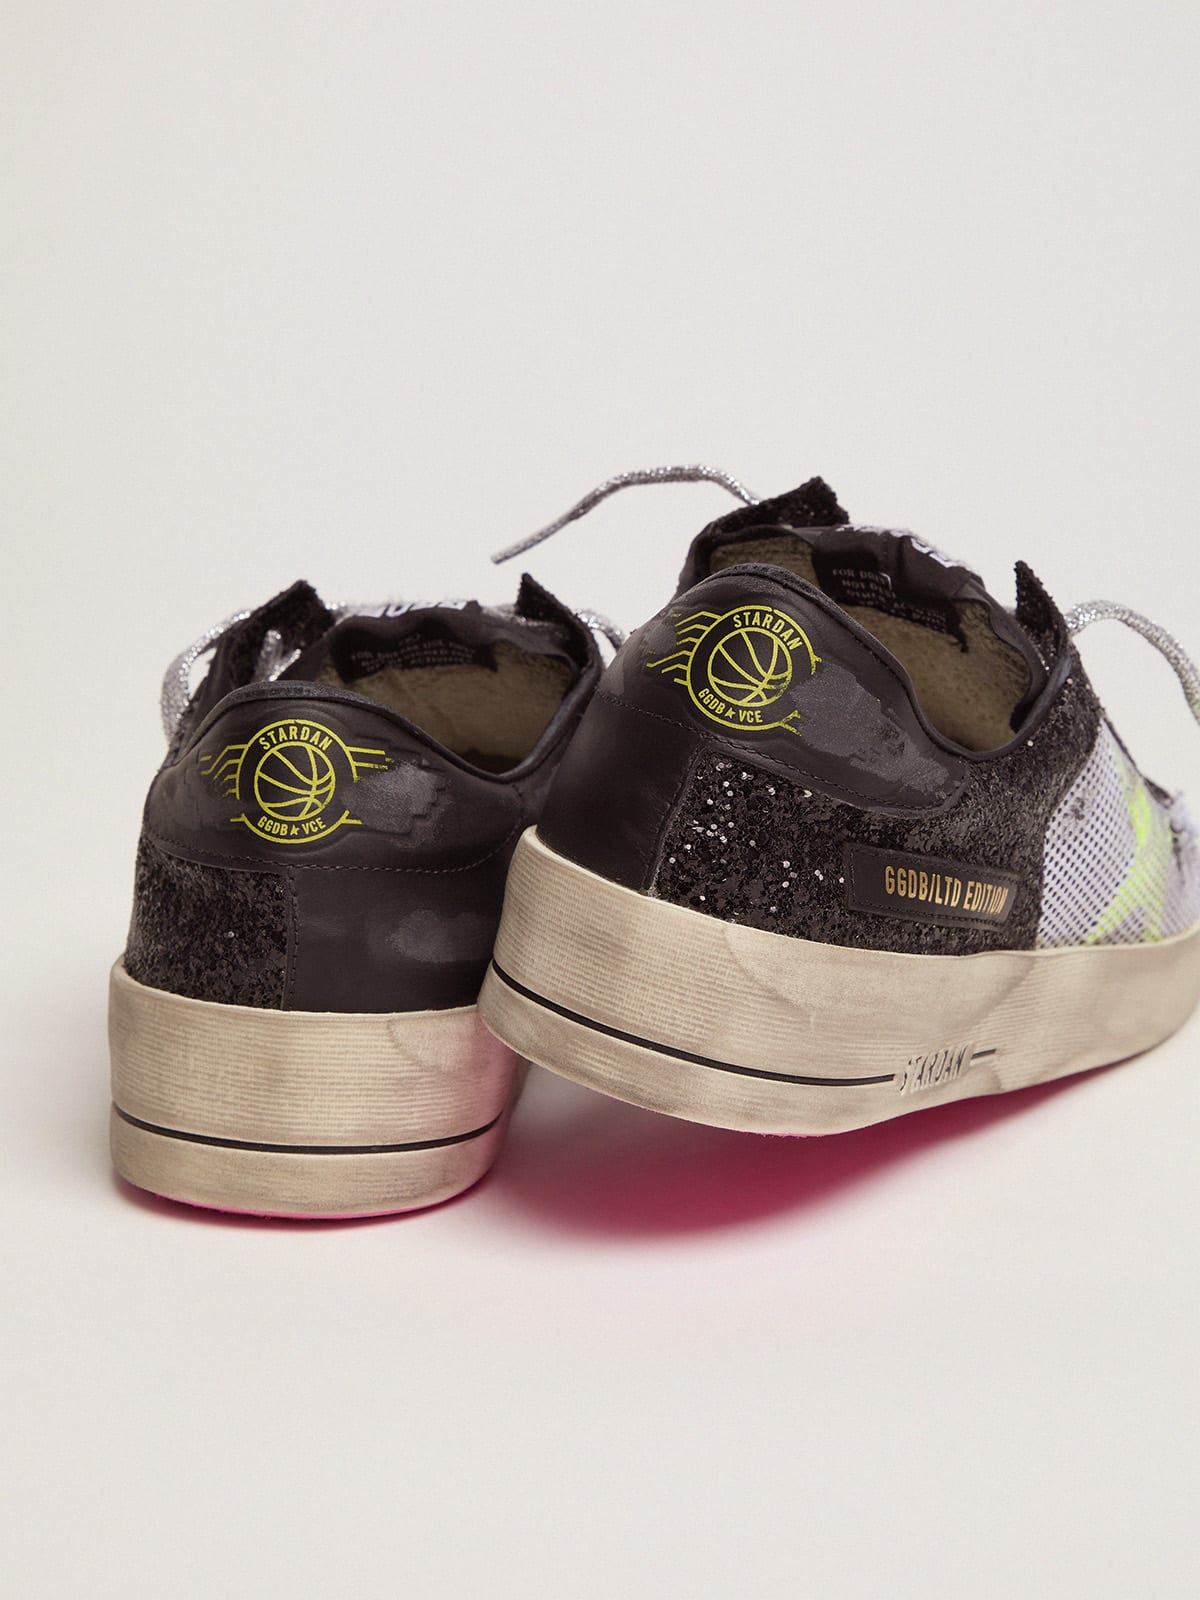 Golden Goose - Stardan sneakers with glittery upper, fluorescent star and mesh inserts in 